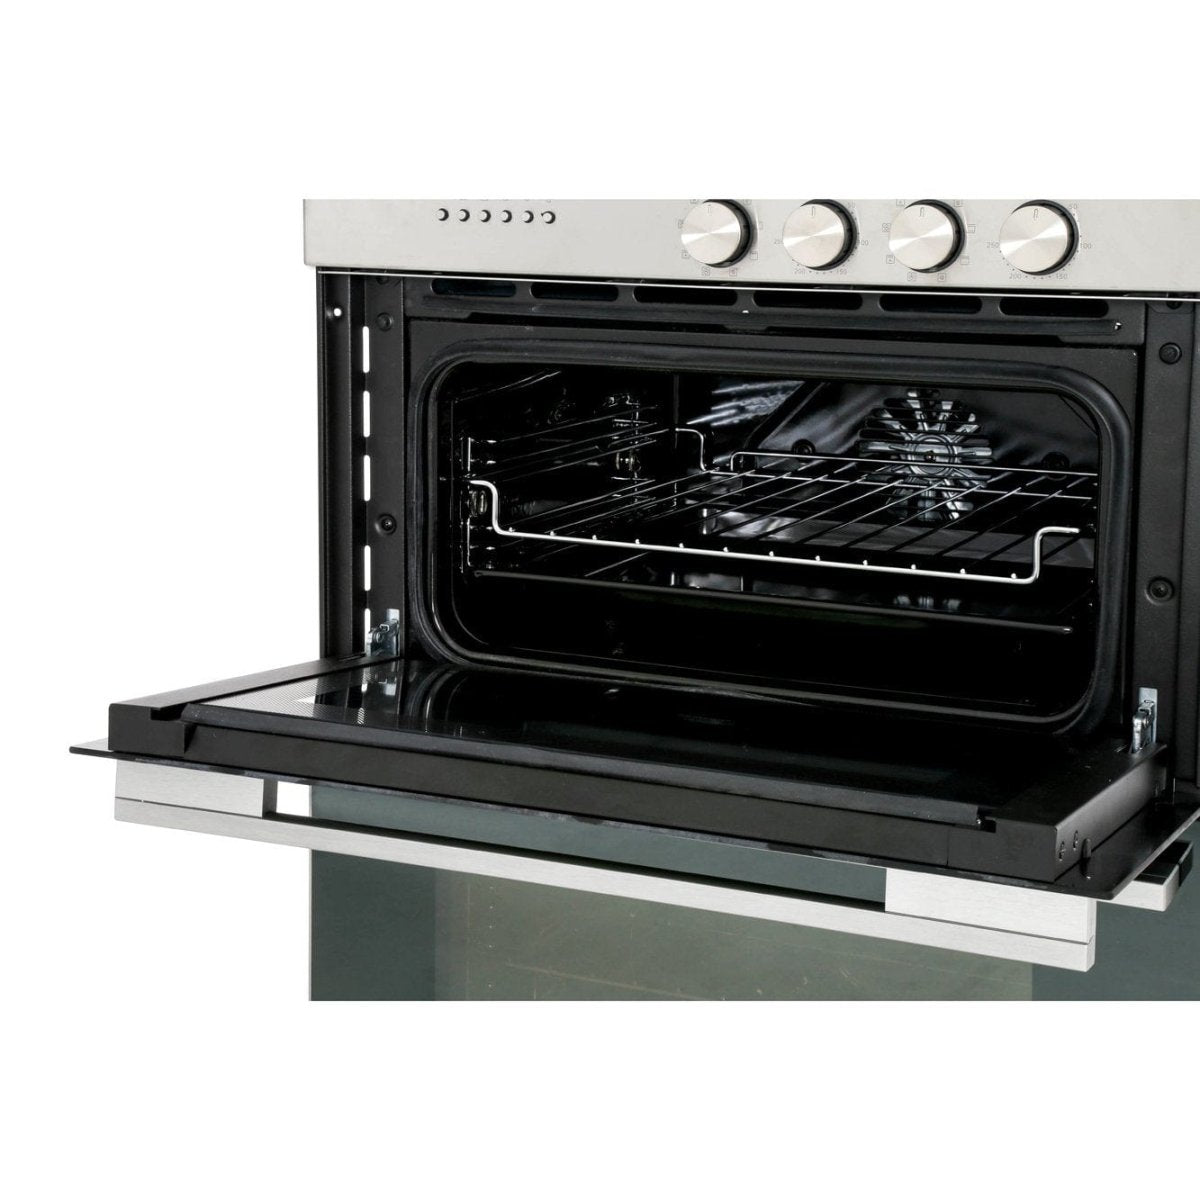 Fisher & Paykel Designer OB60B77CEX3 Built In Electric Double Oven - Black - Stainless Steel | Atlantic Electrics